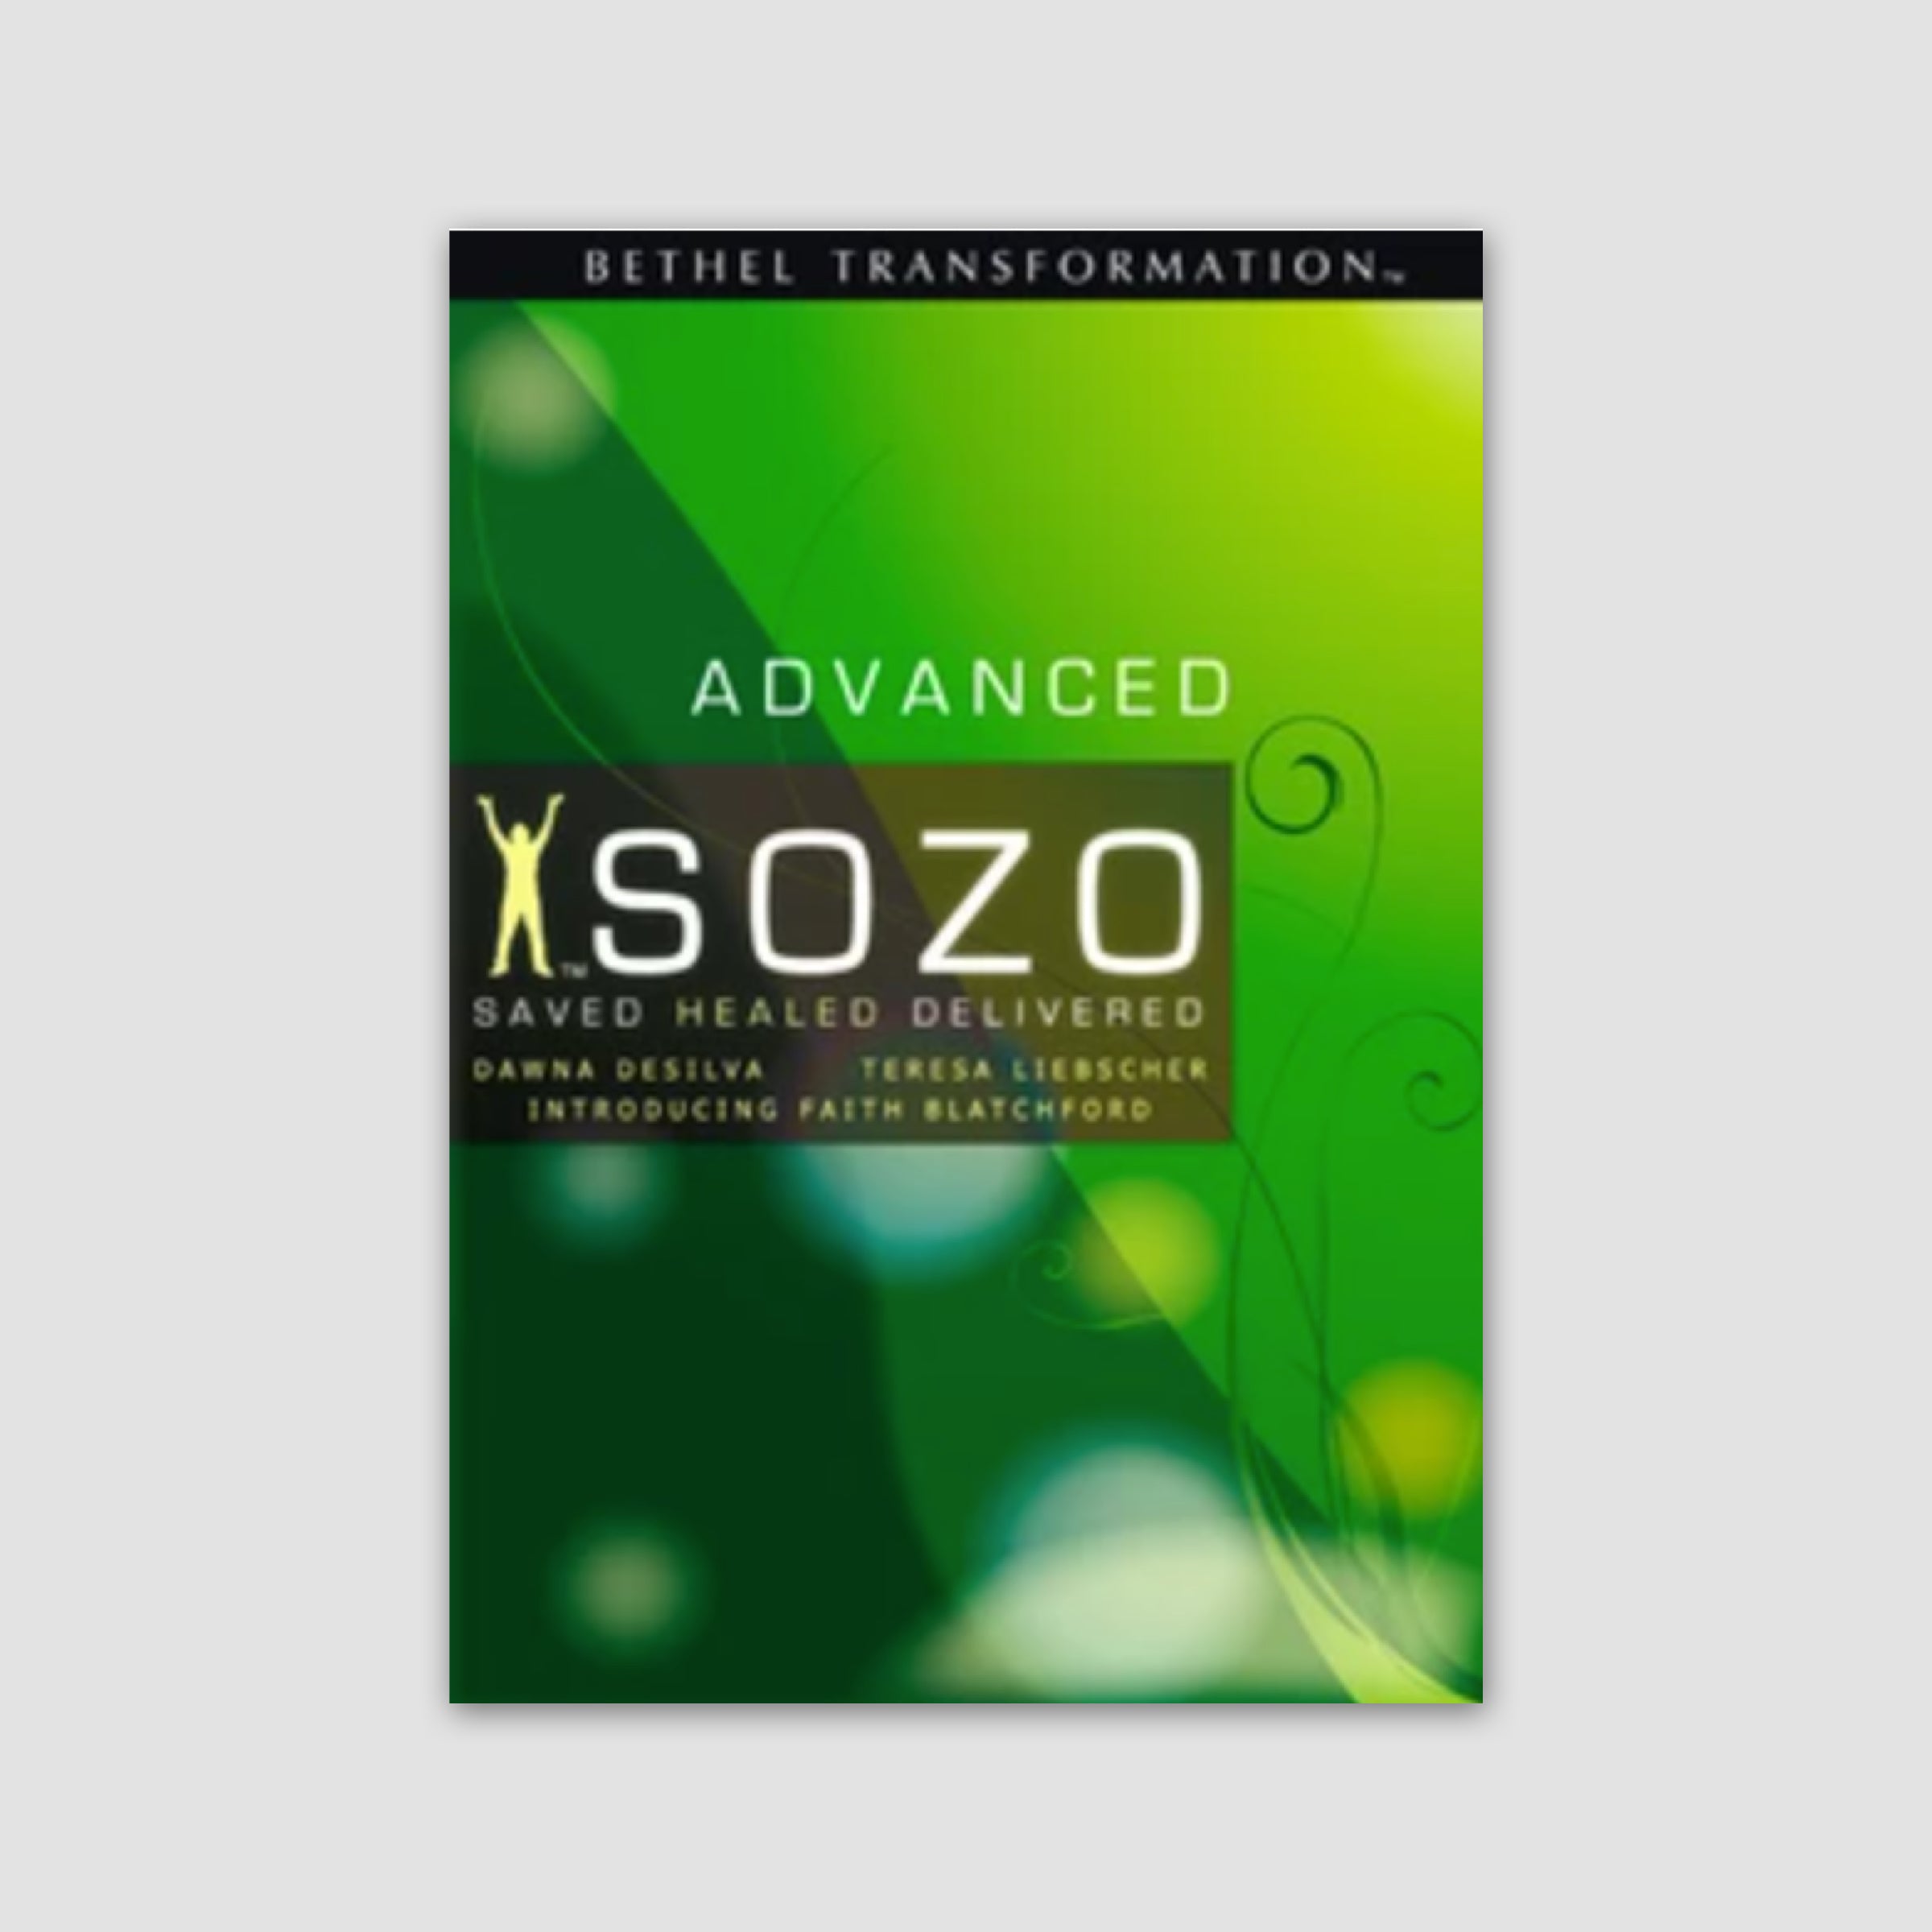 SOZO Advanced Saved, Healed and Delivered